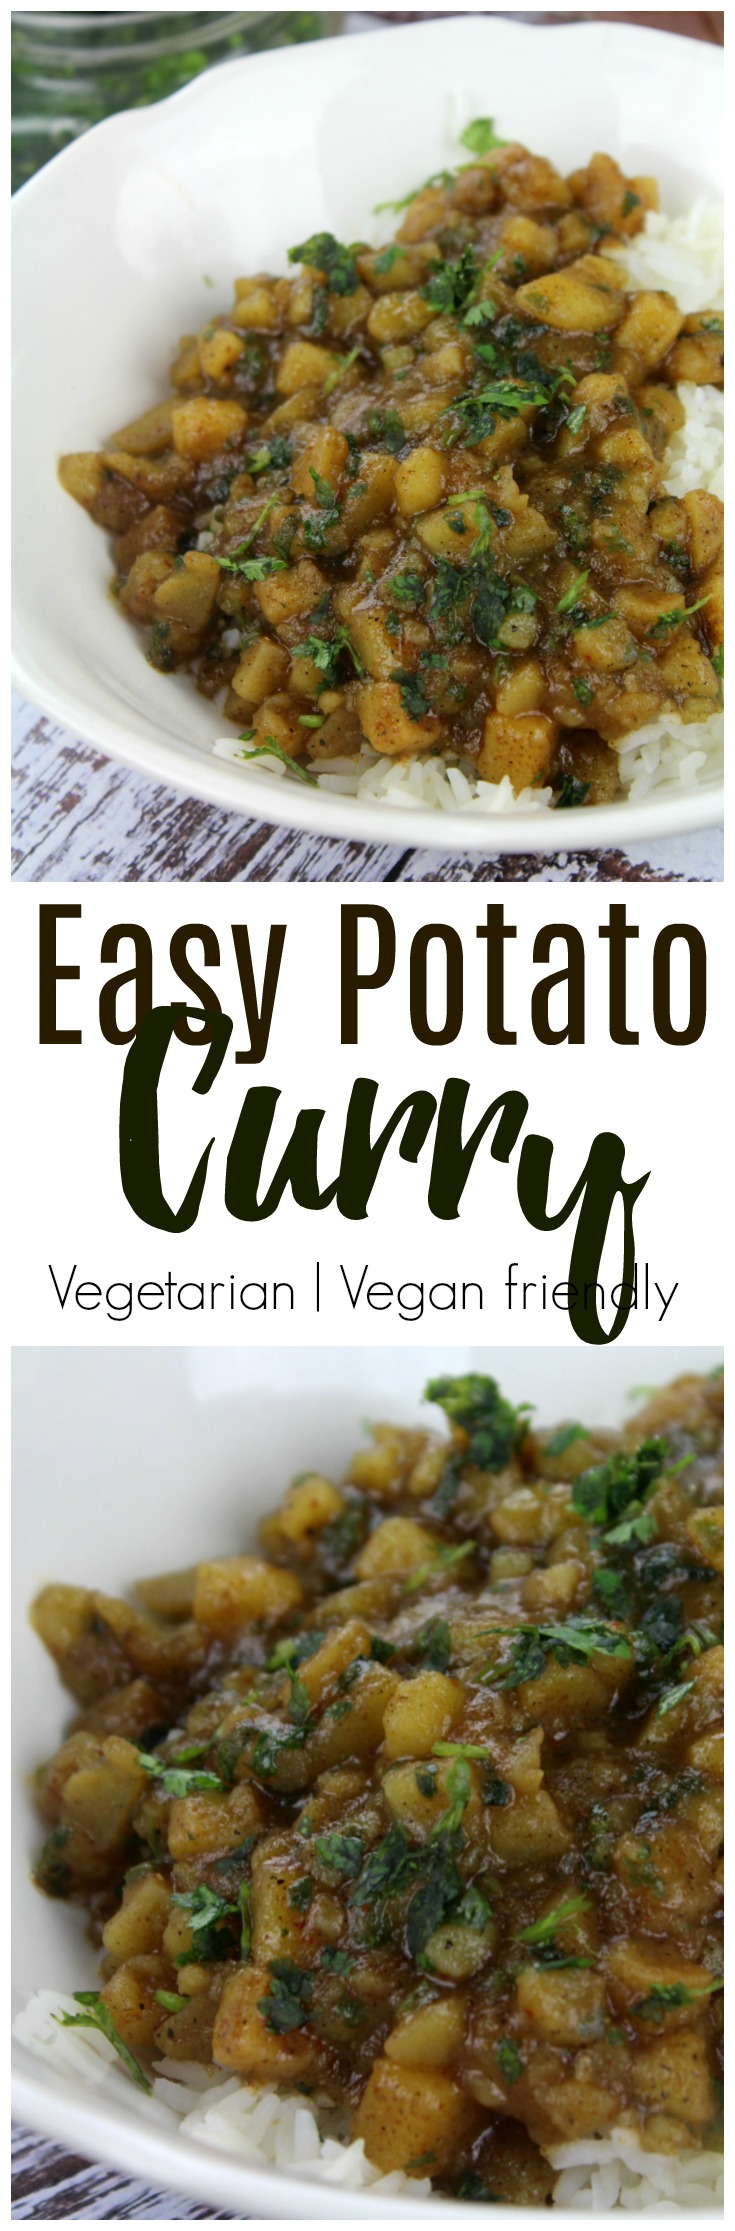 A rich and flavorful potato curry that comes together with simple ingredients.  #potato #curry #meatless #vegan #vegetarian